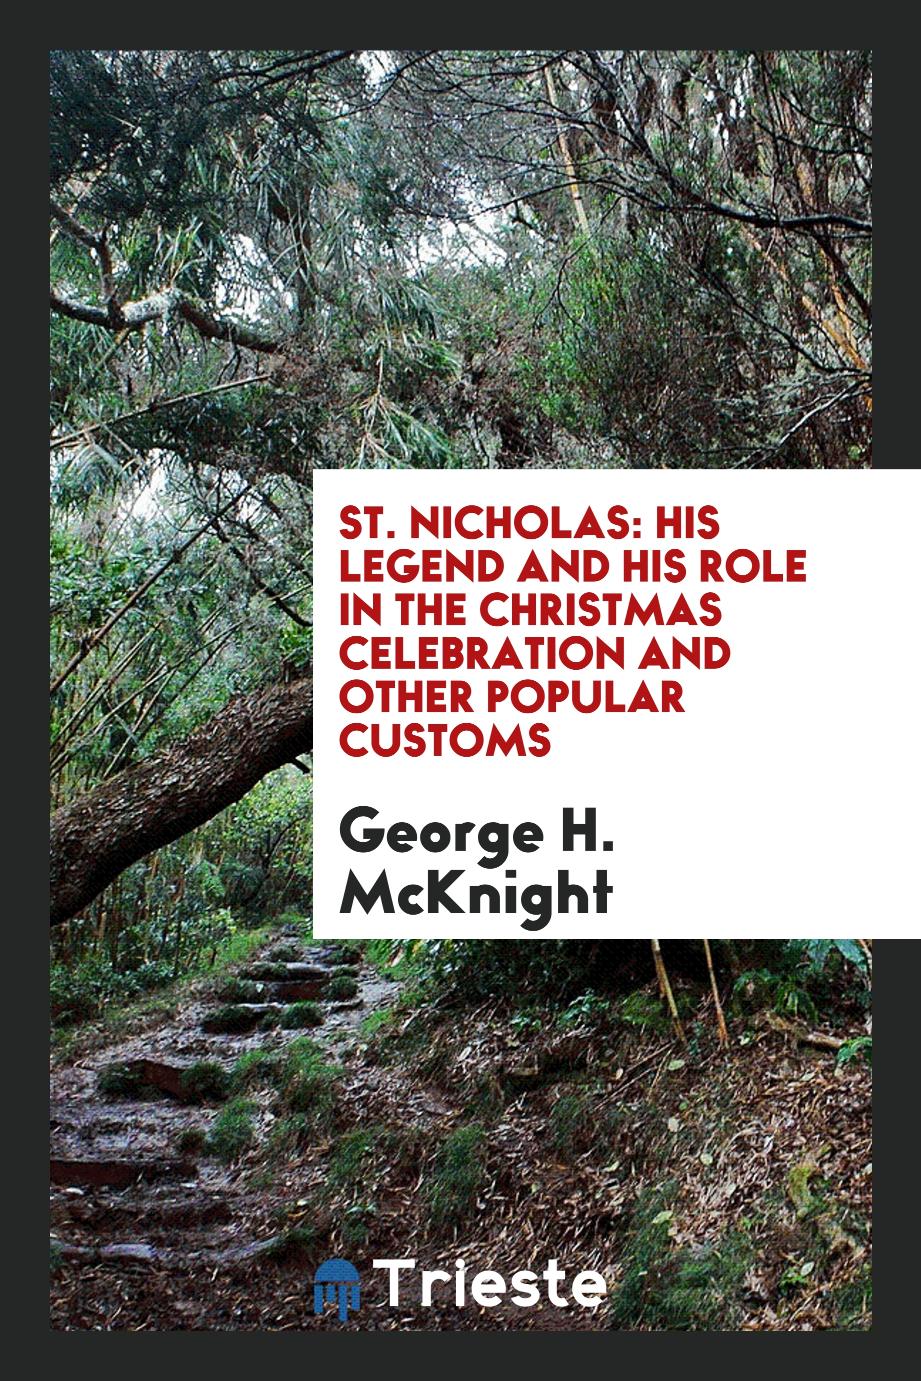 St. Nicholas: His Legend and His Role in the Christmas Celebration and Other Popular Customs